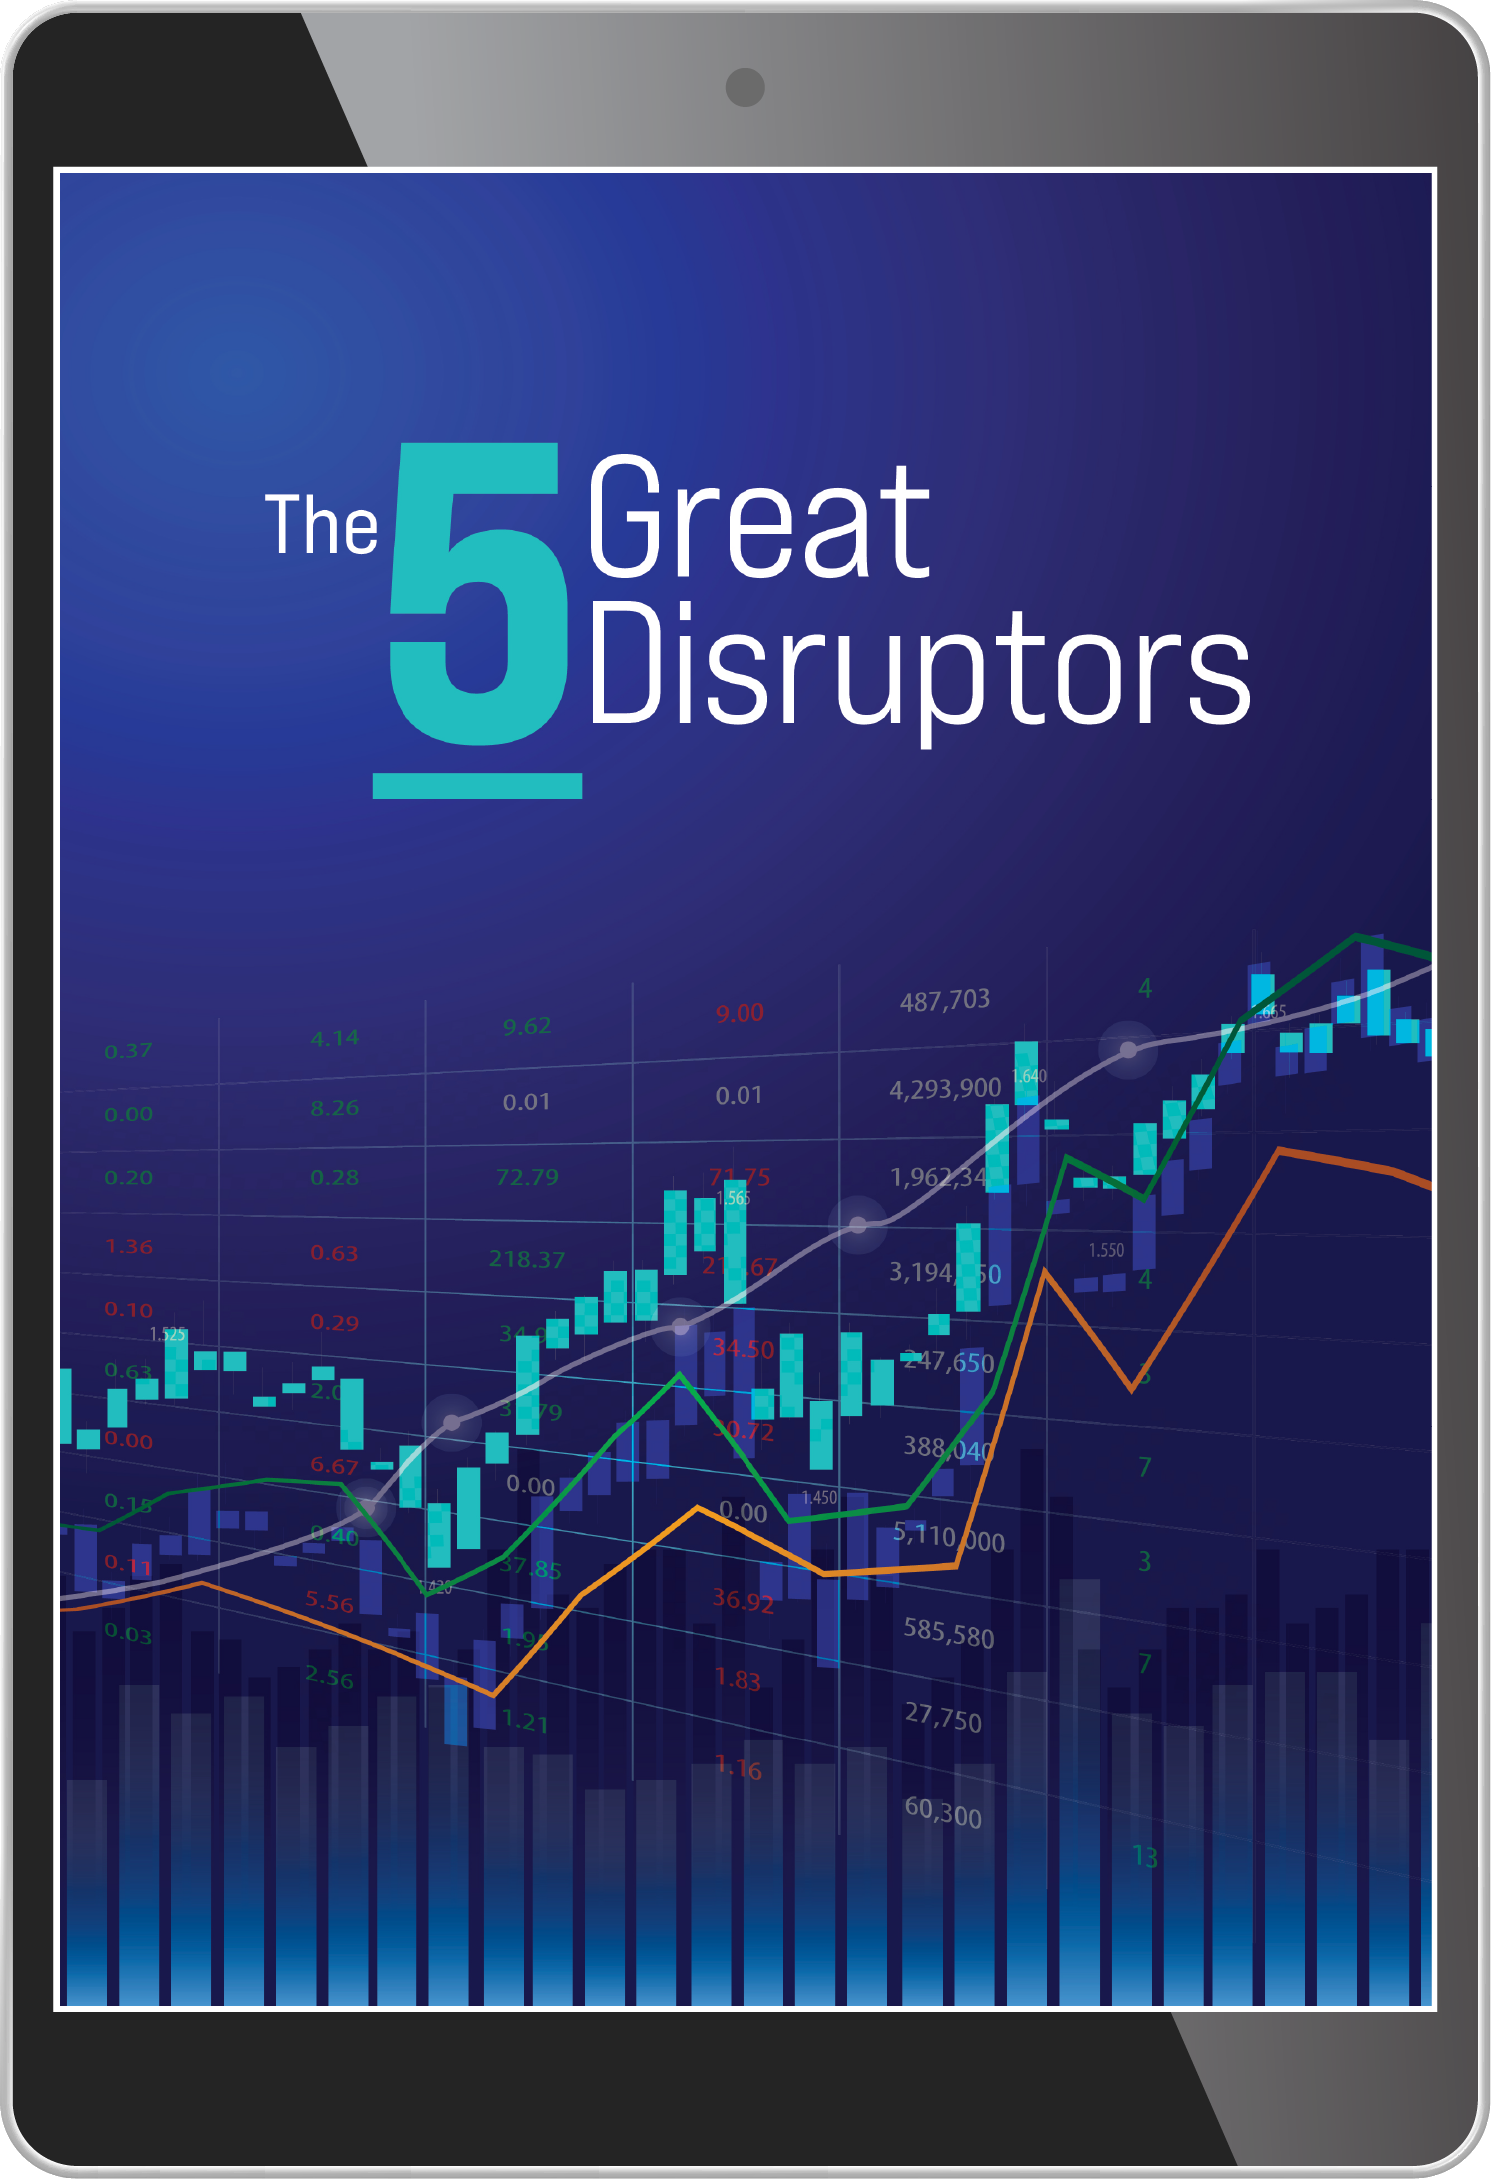 5 Great Disruptors to Make Your Bear Market Fortune report.